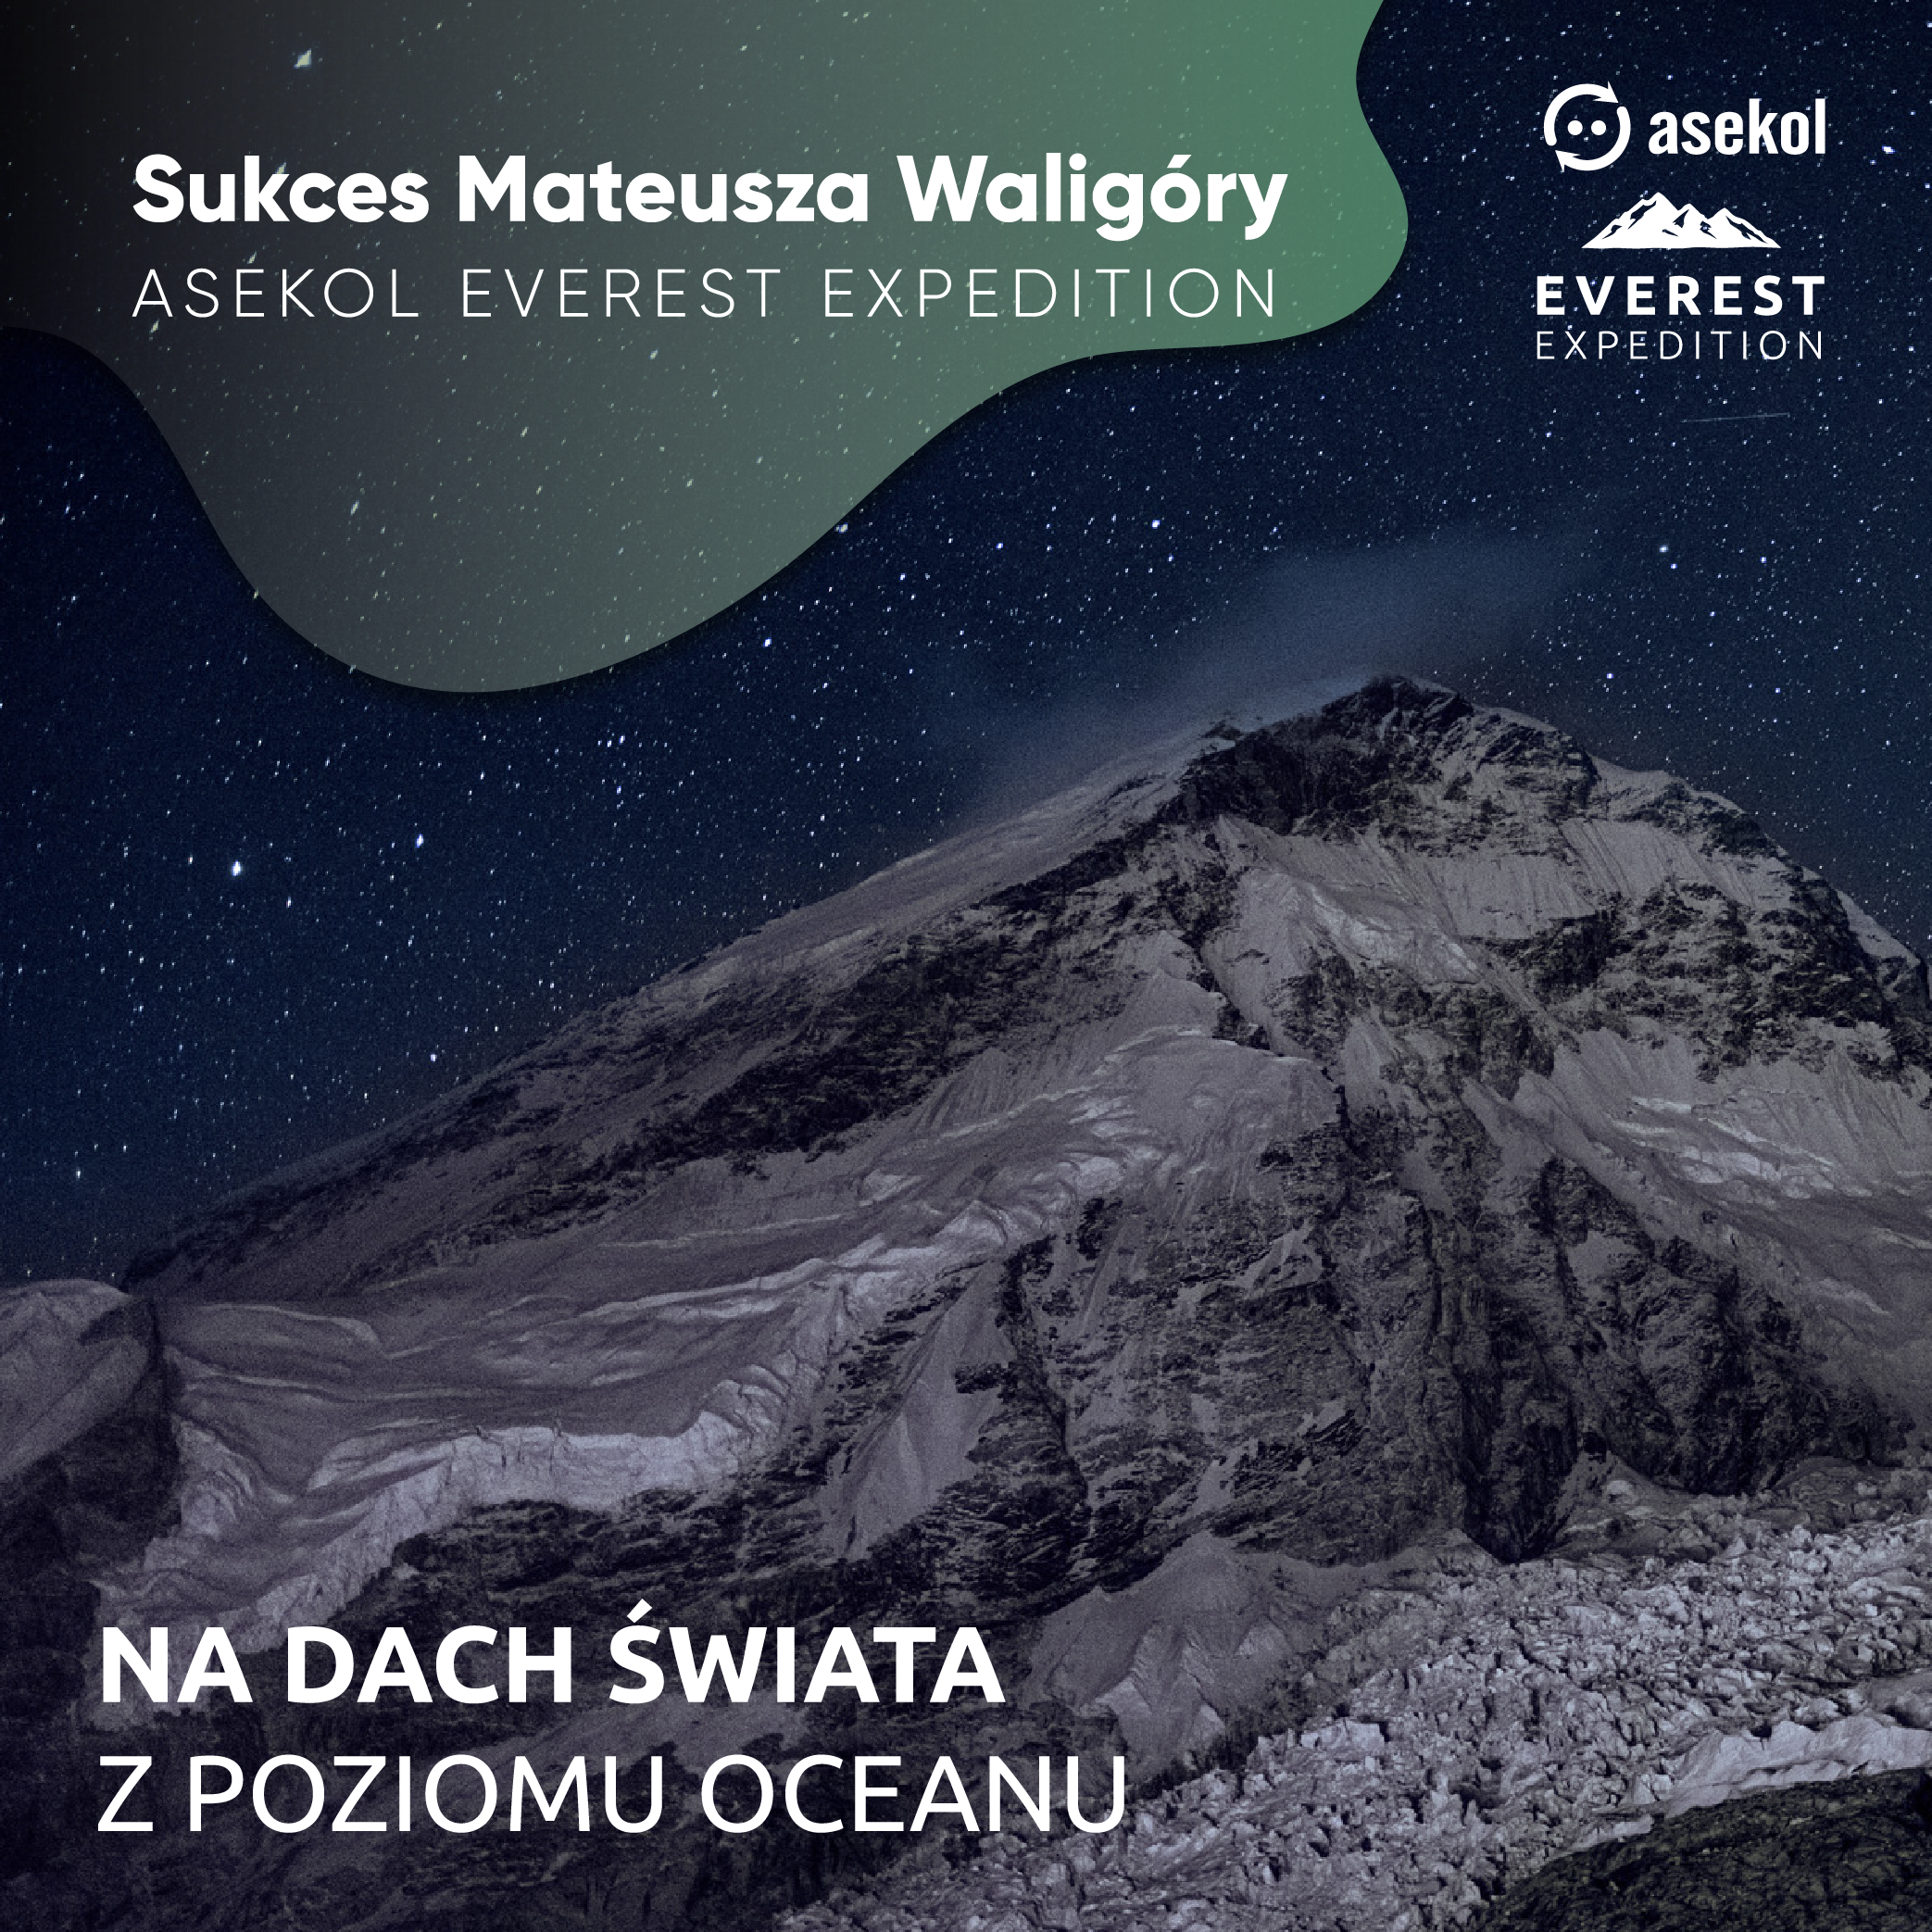 Sukces Asekol Everest Expedition!